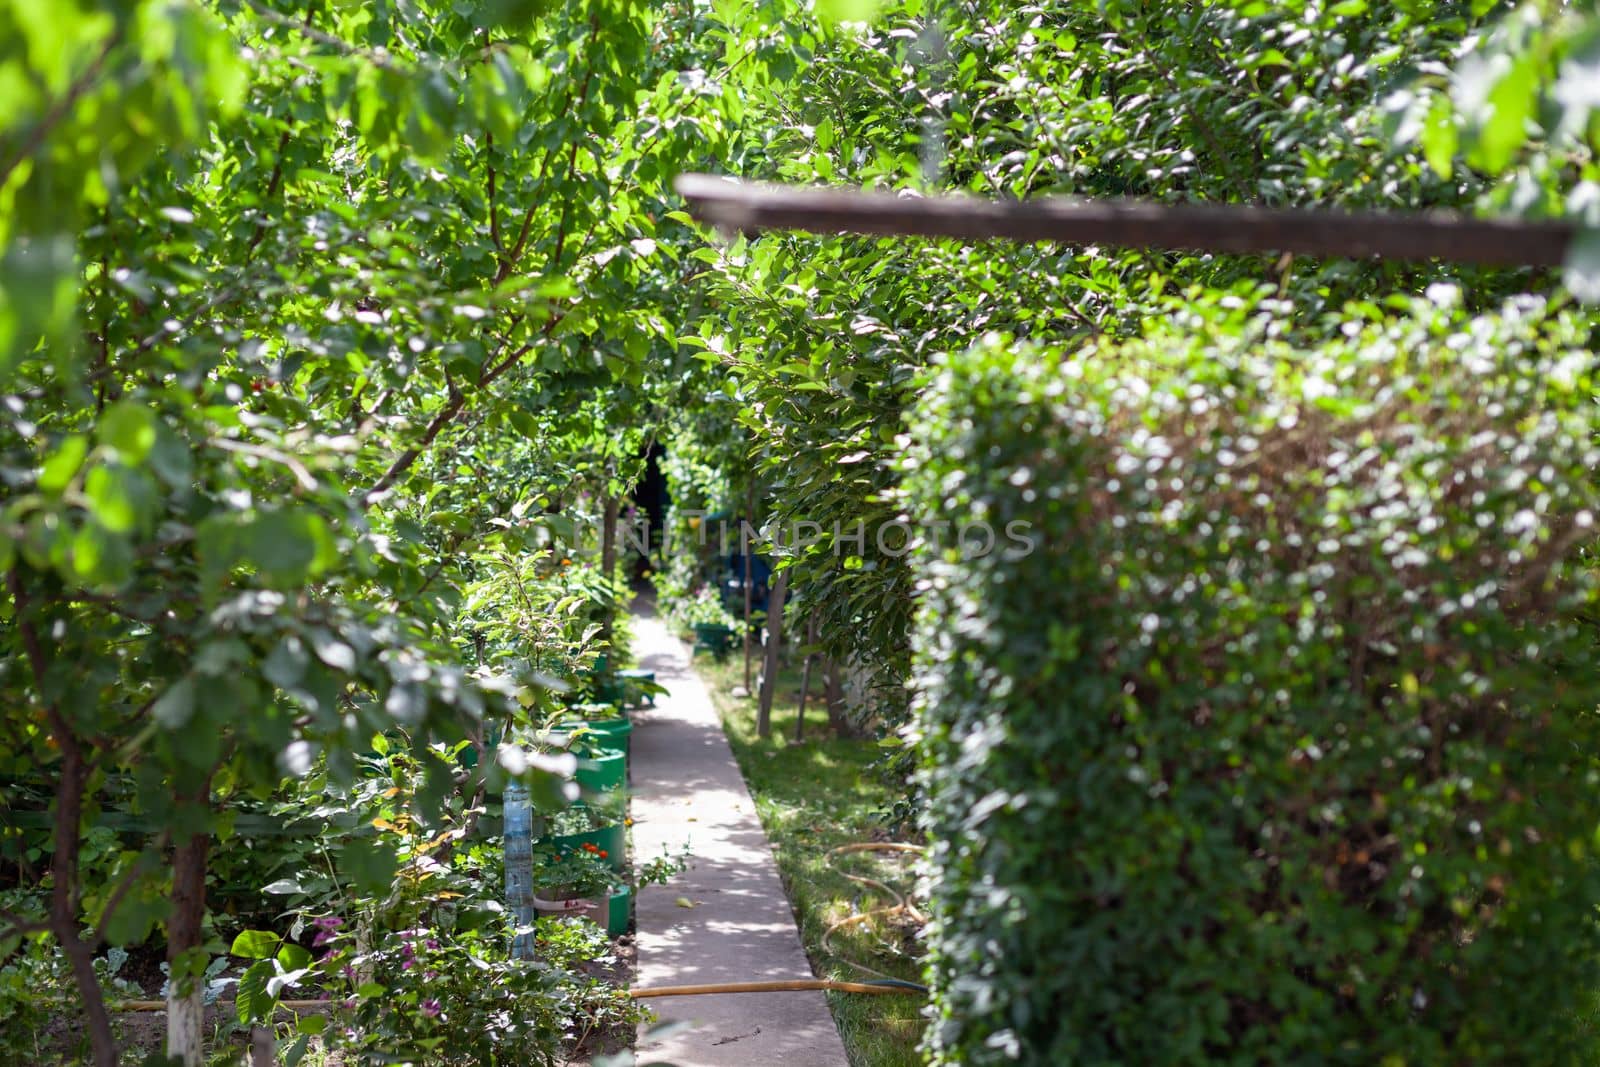 A large home garden of fruit trees. A beautiful and dense garden of apple and apricot trees with lush green foliage.